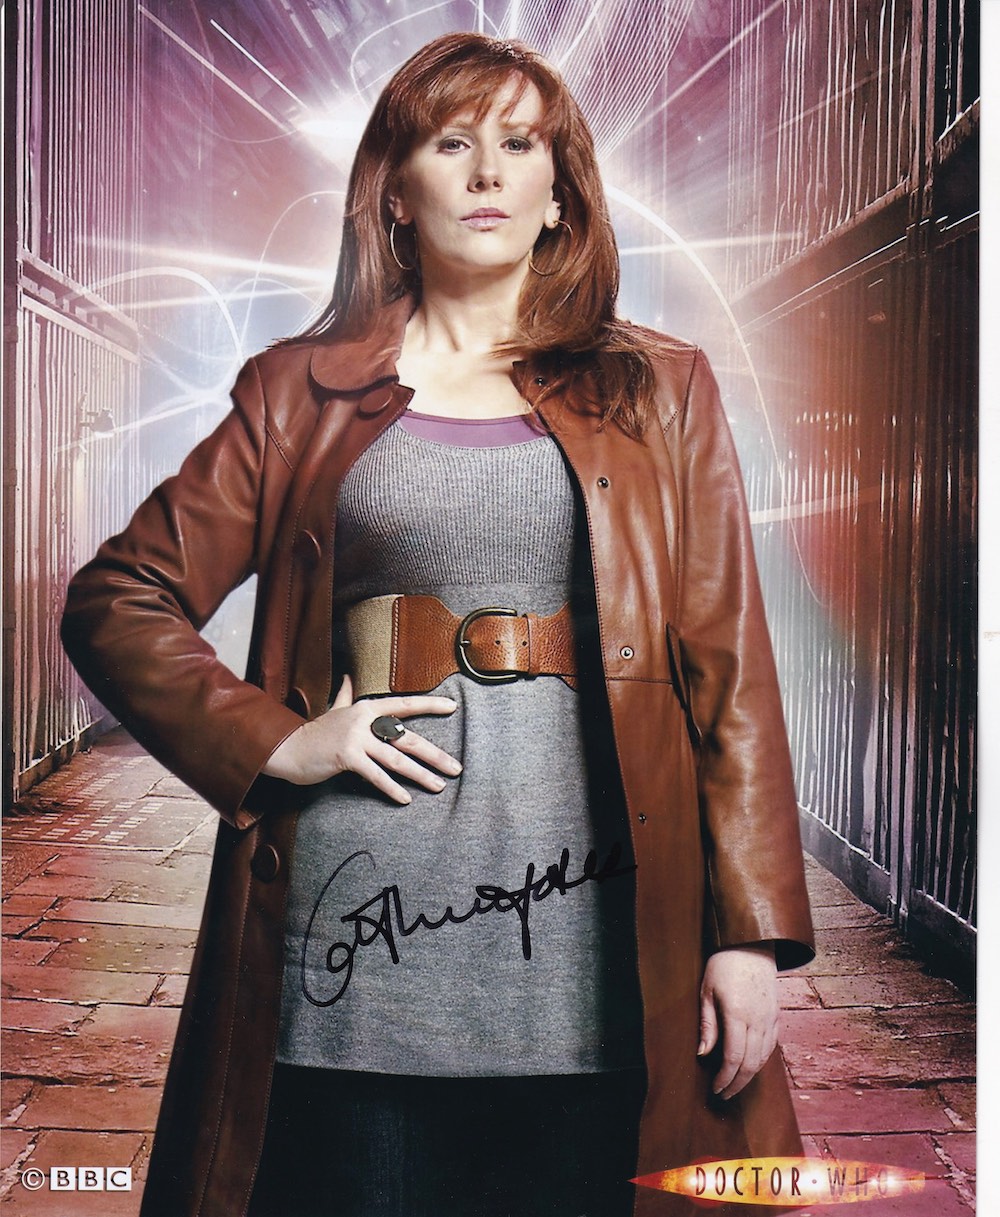 Catherine Tate Popular Actress, Entertainer, Dr Who 10x8 inch Signed Photo. Good Condition. All